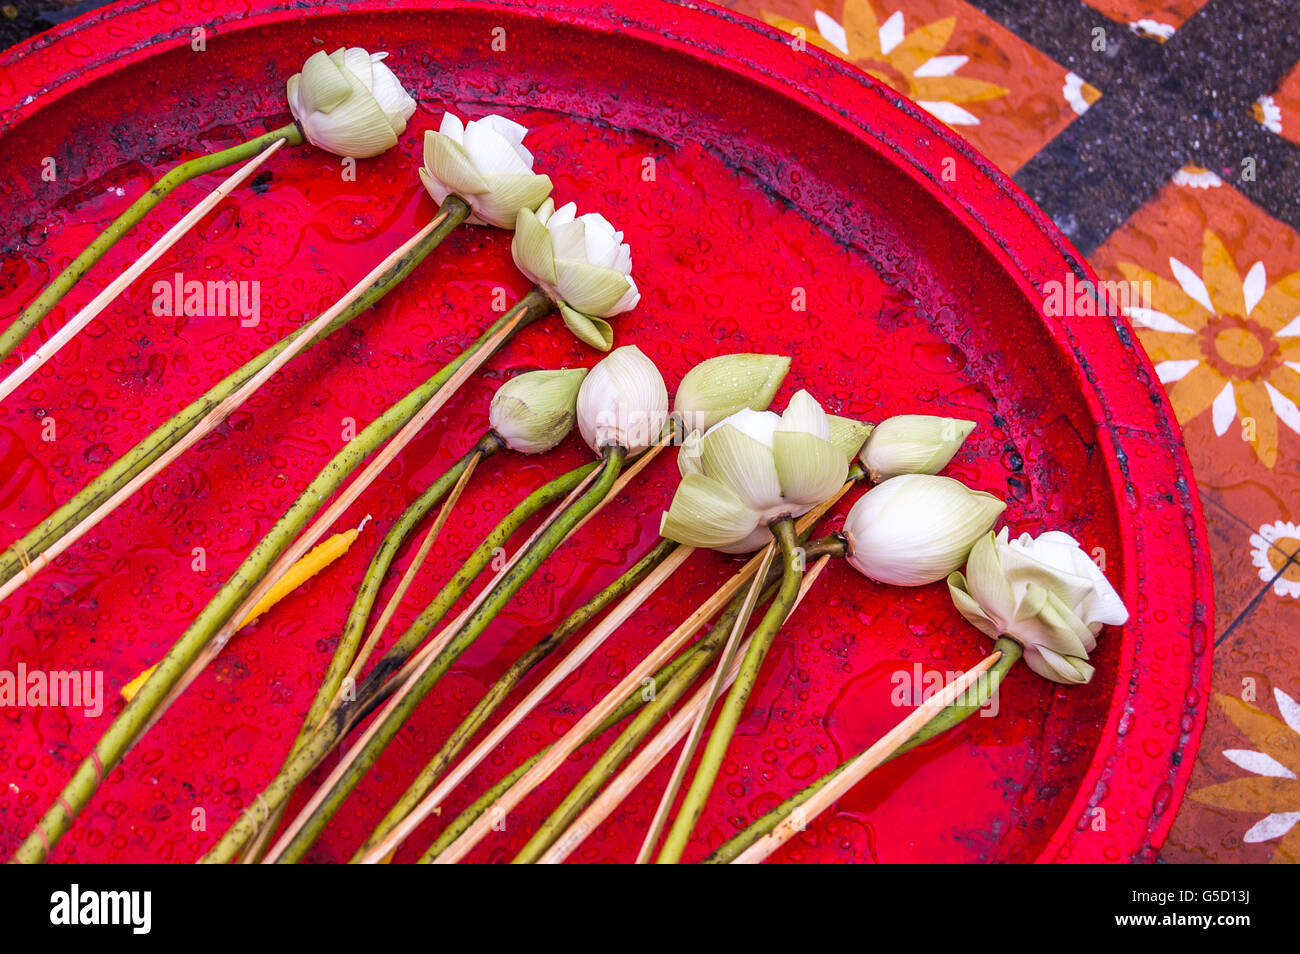 White lotus flowers offerings on red tray in Buddhist temple, northern Thailand Stock Photo